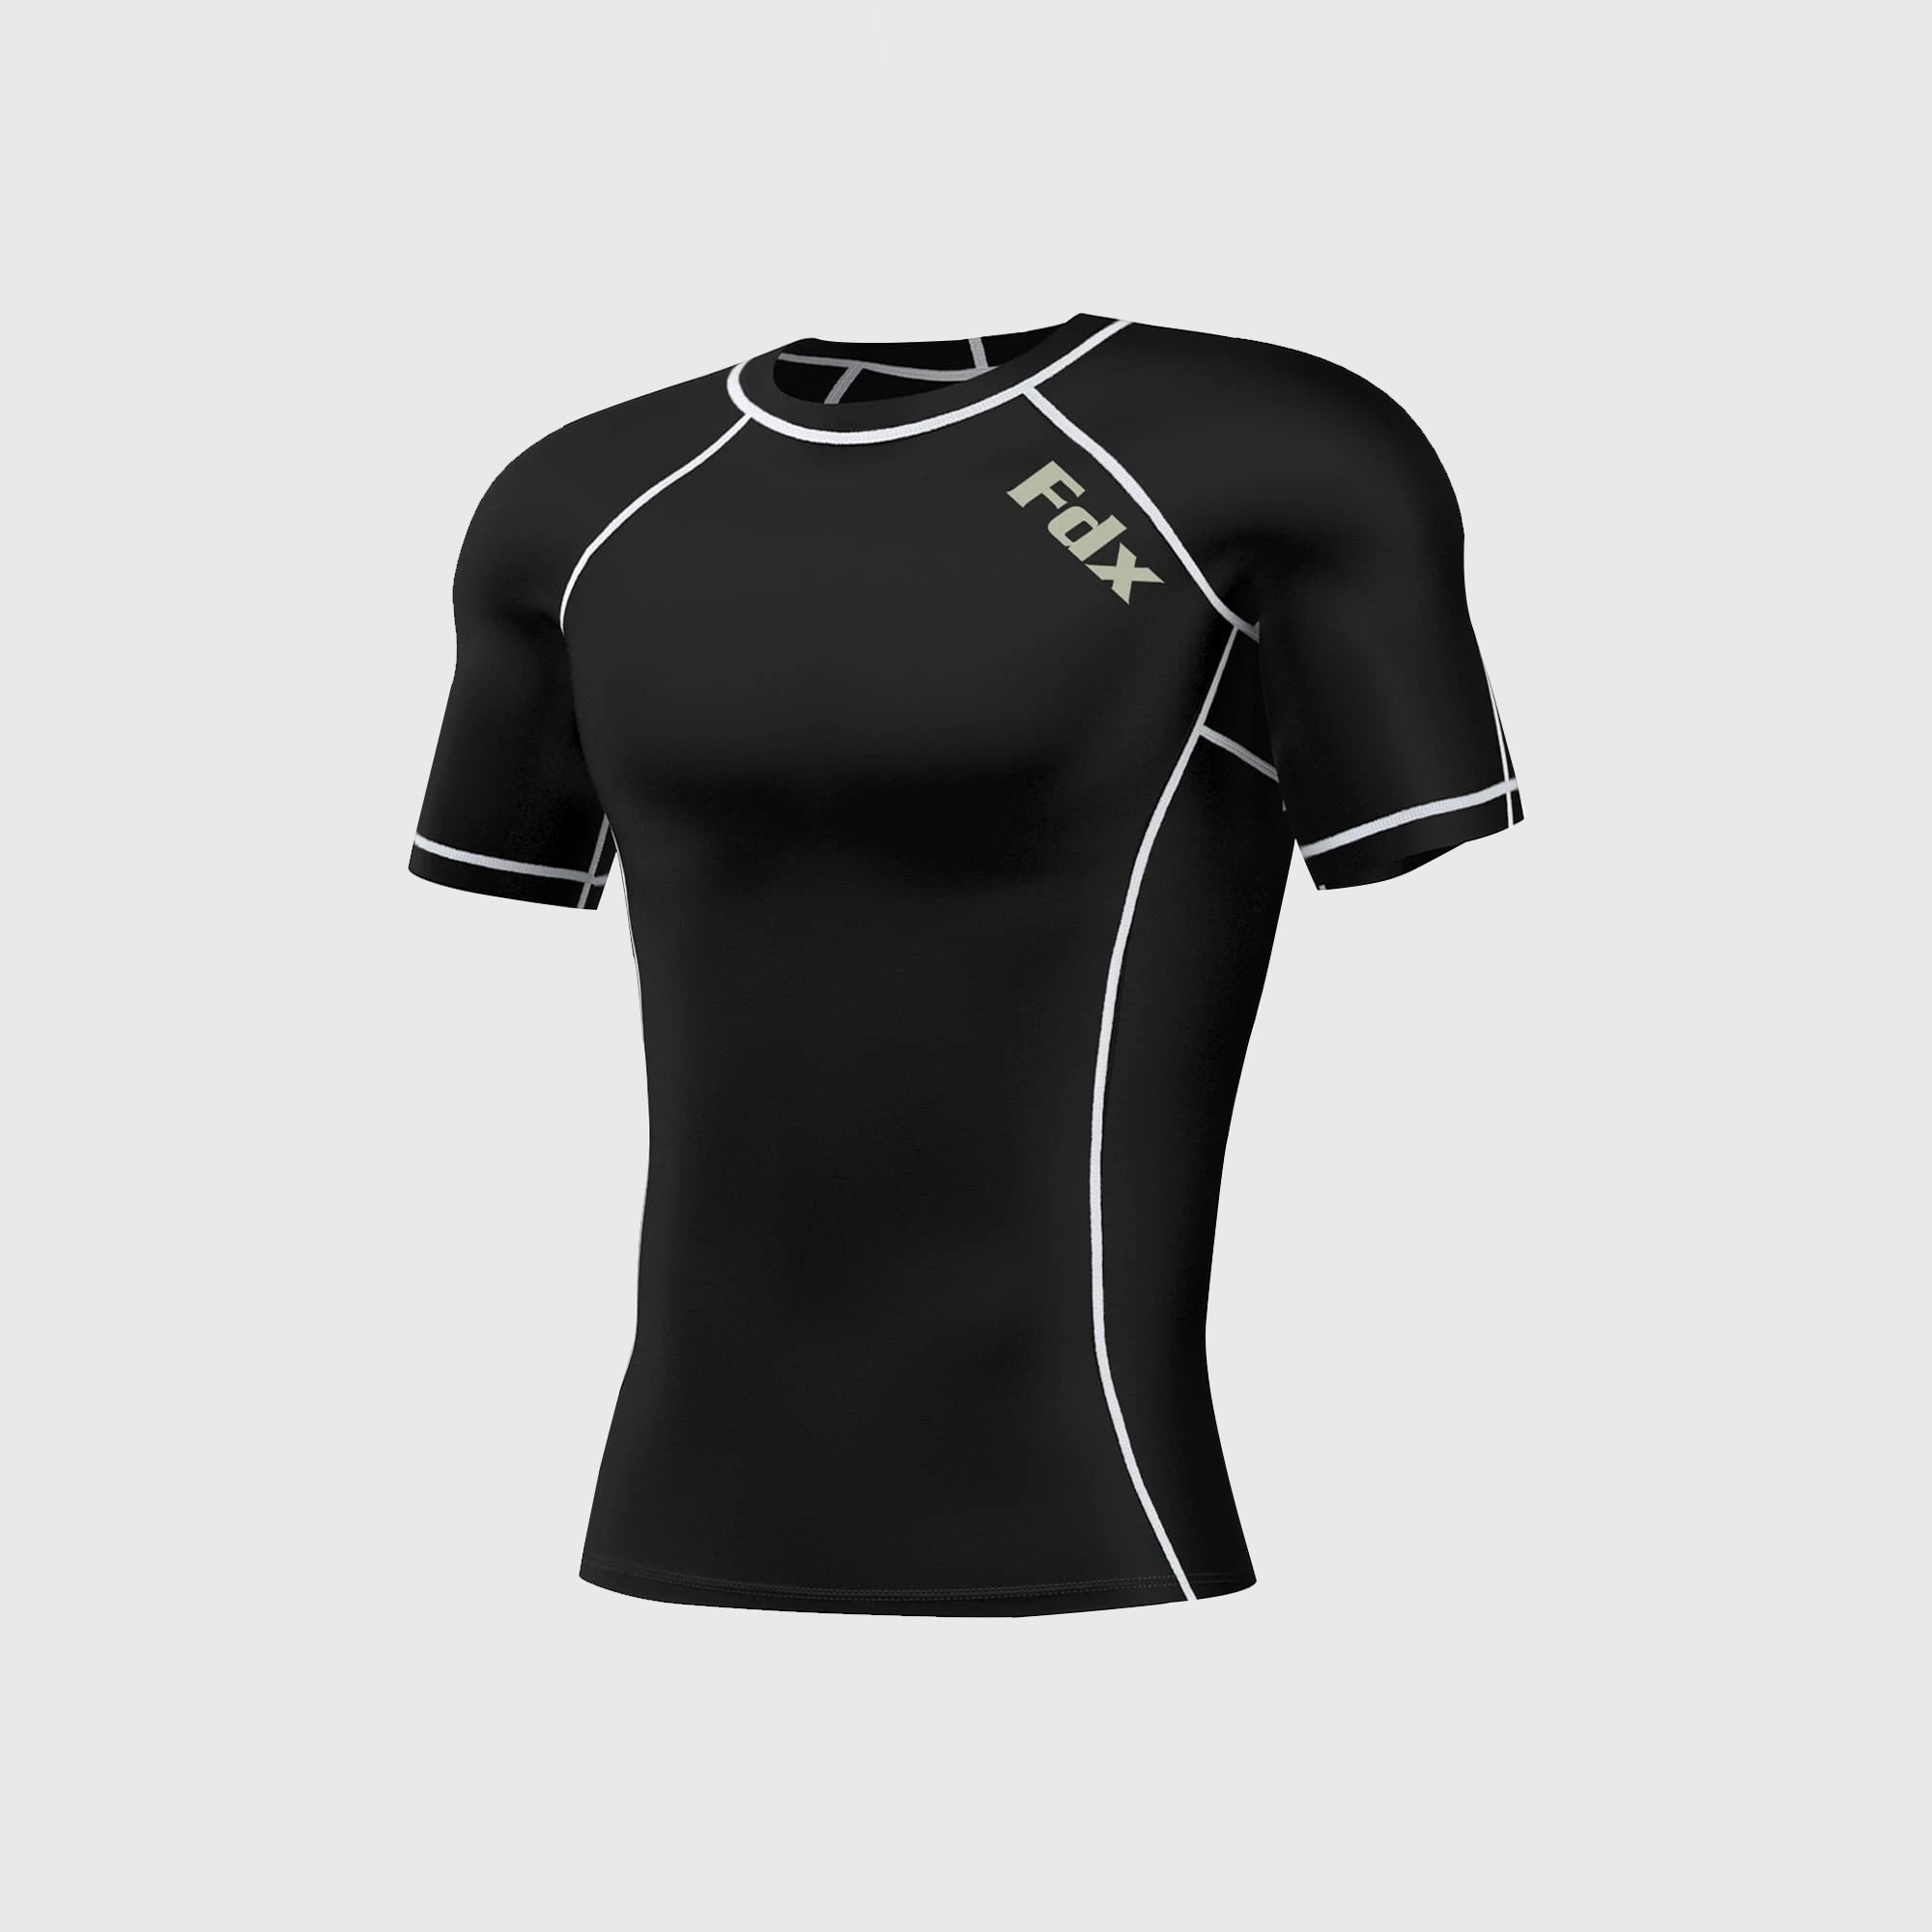 Fdx Mens Black Short Sleeve Compression Top Running Gym Workout Wear Rash Guard Stretchable Breathable - Cosmic